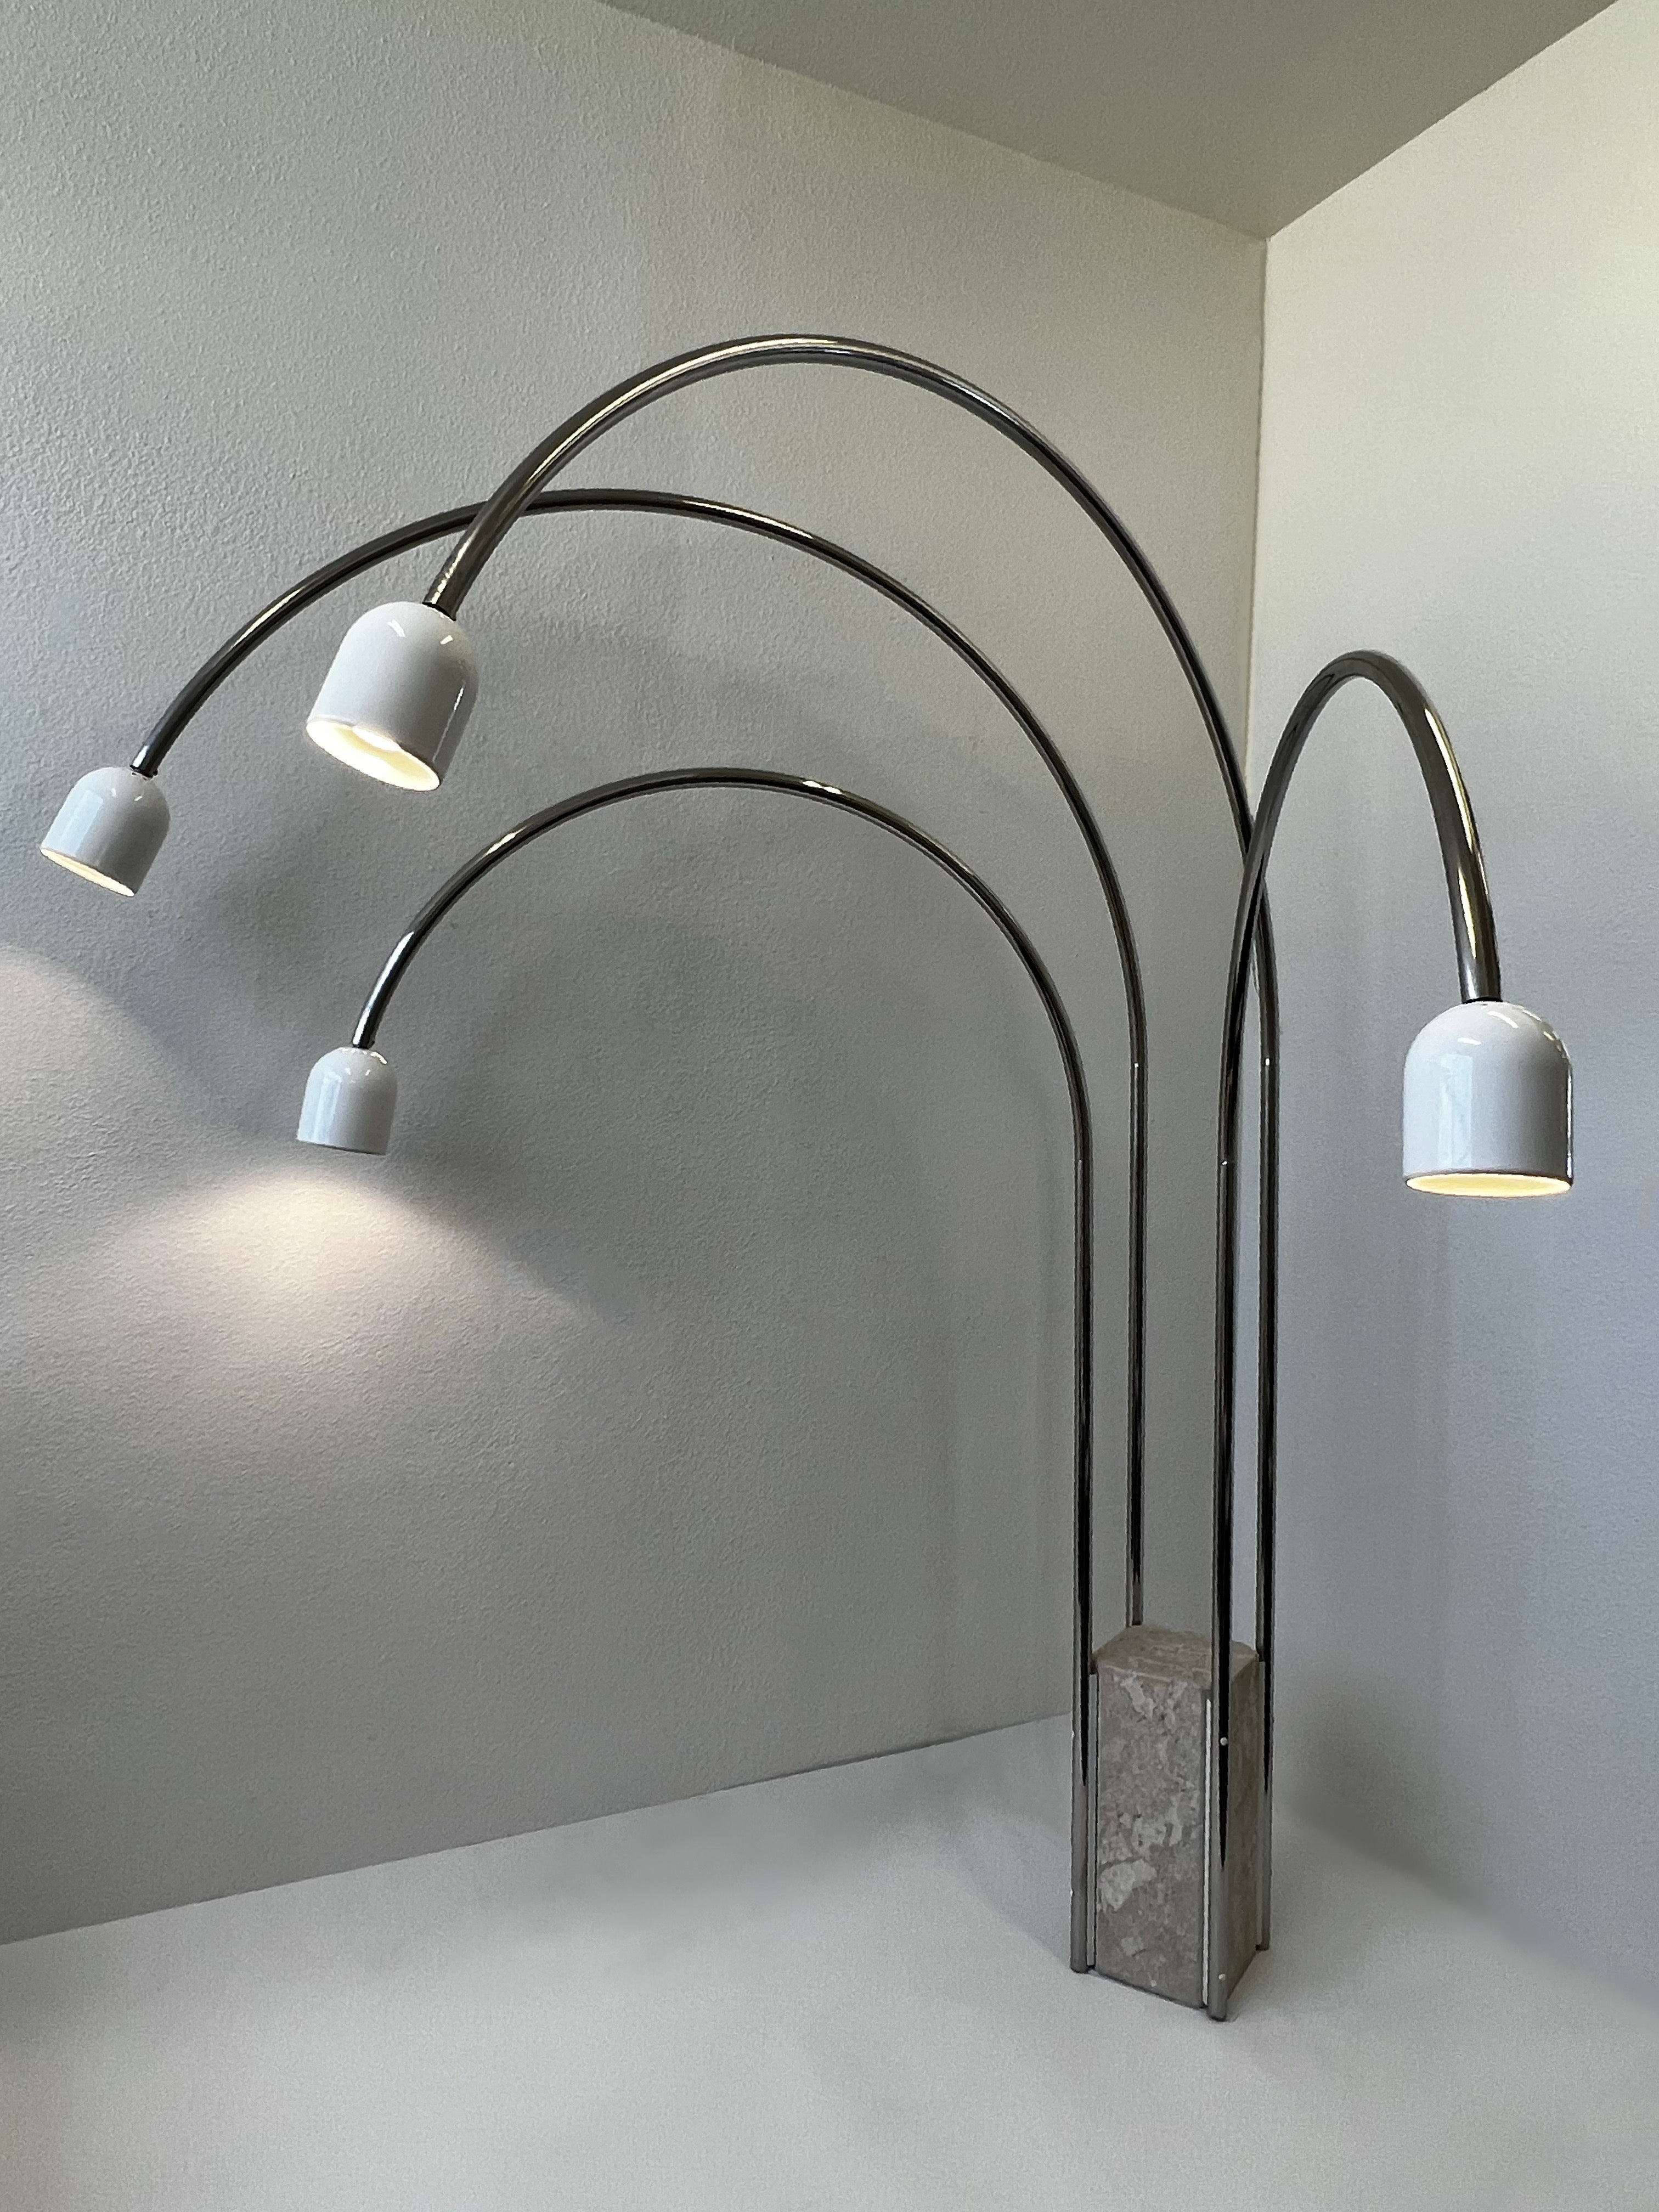 Rare Italian adjustable arch floor lamp by Goffredo Reggiani.
Constructed of travertine, chrome tubing and white powder coated shades. 
In beautiful vintage condition. 
Newly rewired. 
All arms rotate and it takes four 75w. Max Edison light bulbs.